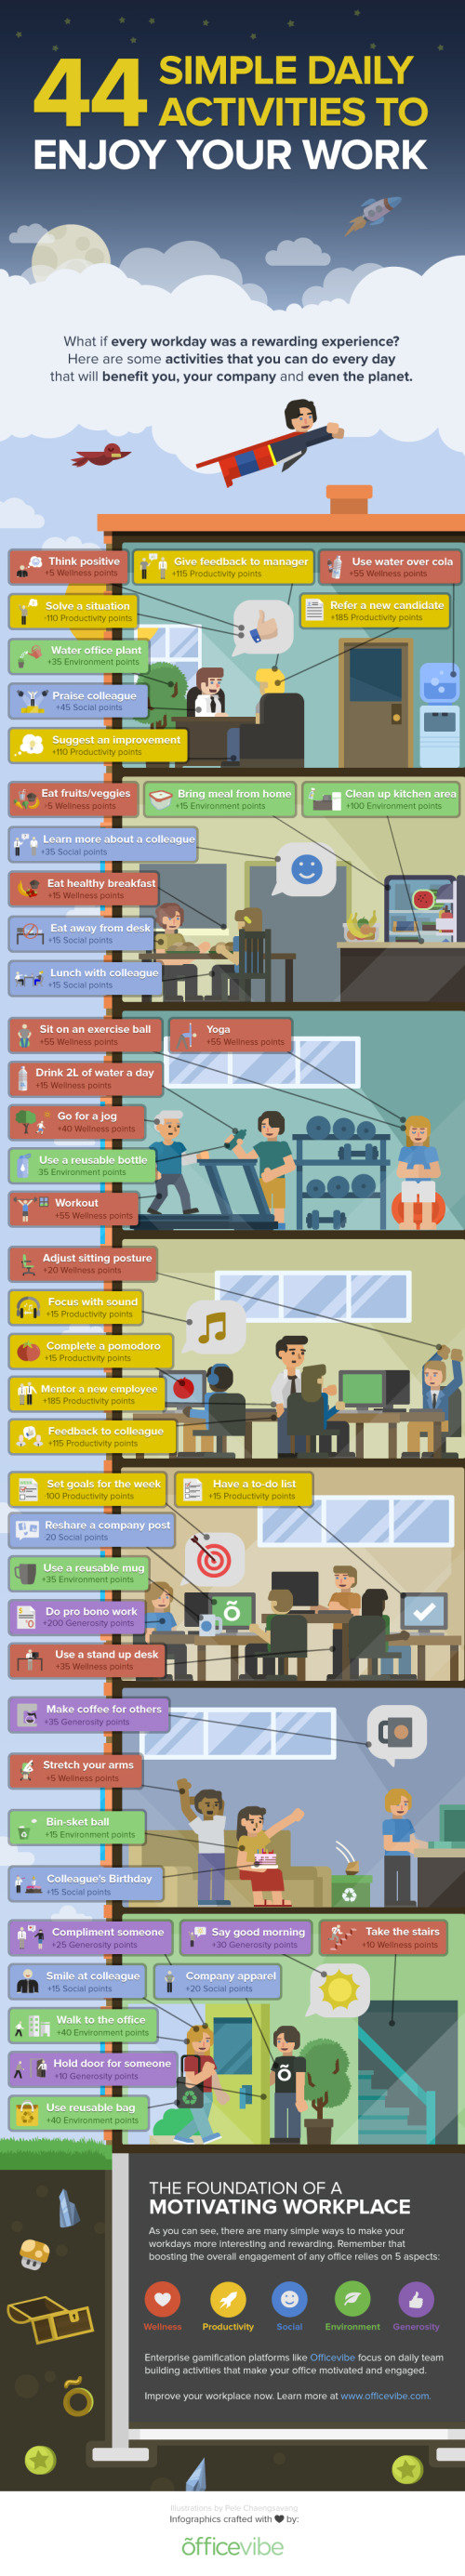 44 Simple Daily Activities To Enjoy Your WOrk infographic